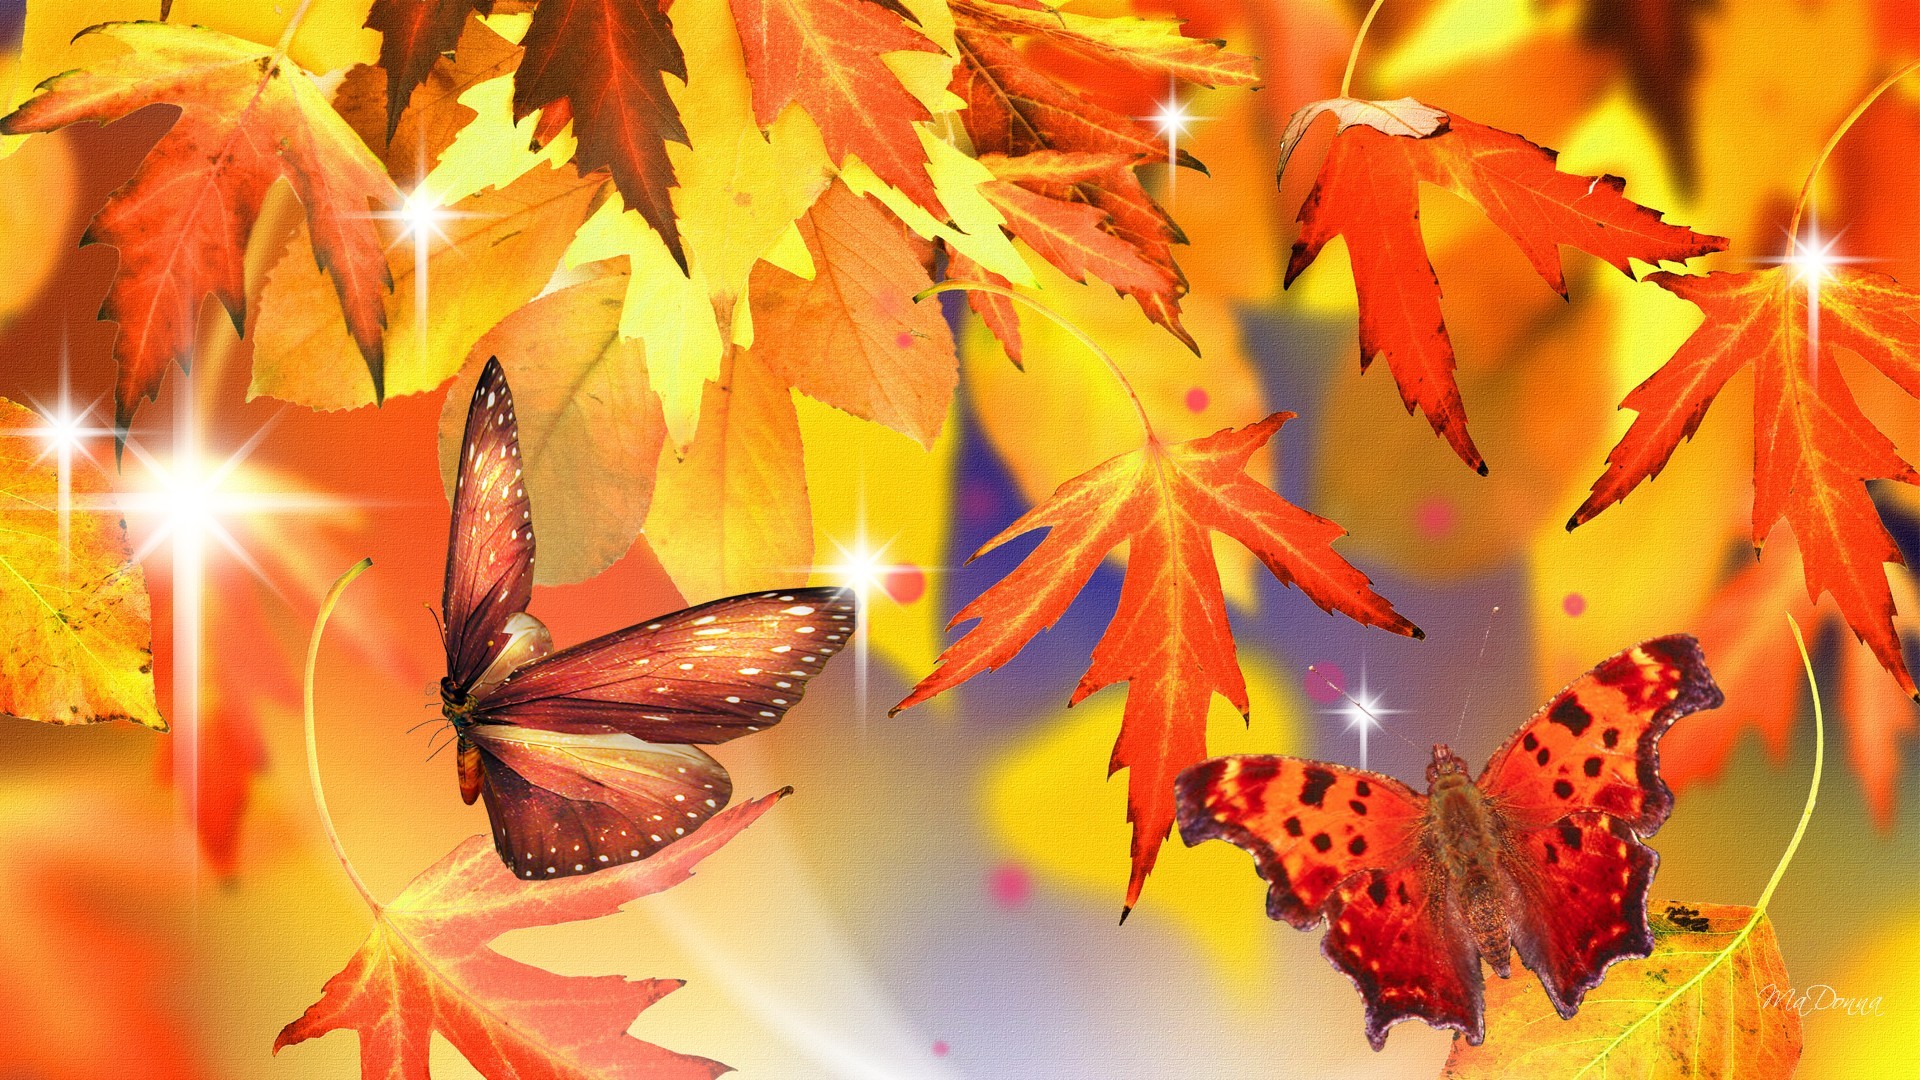 Autumn Leaves and Butterflies by MaDonna